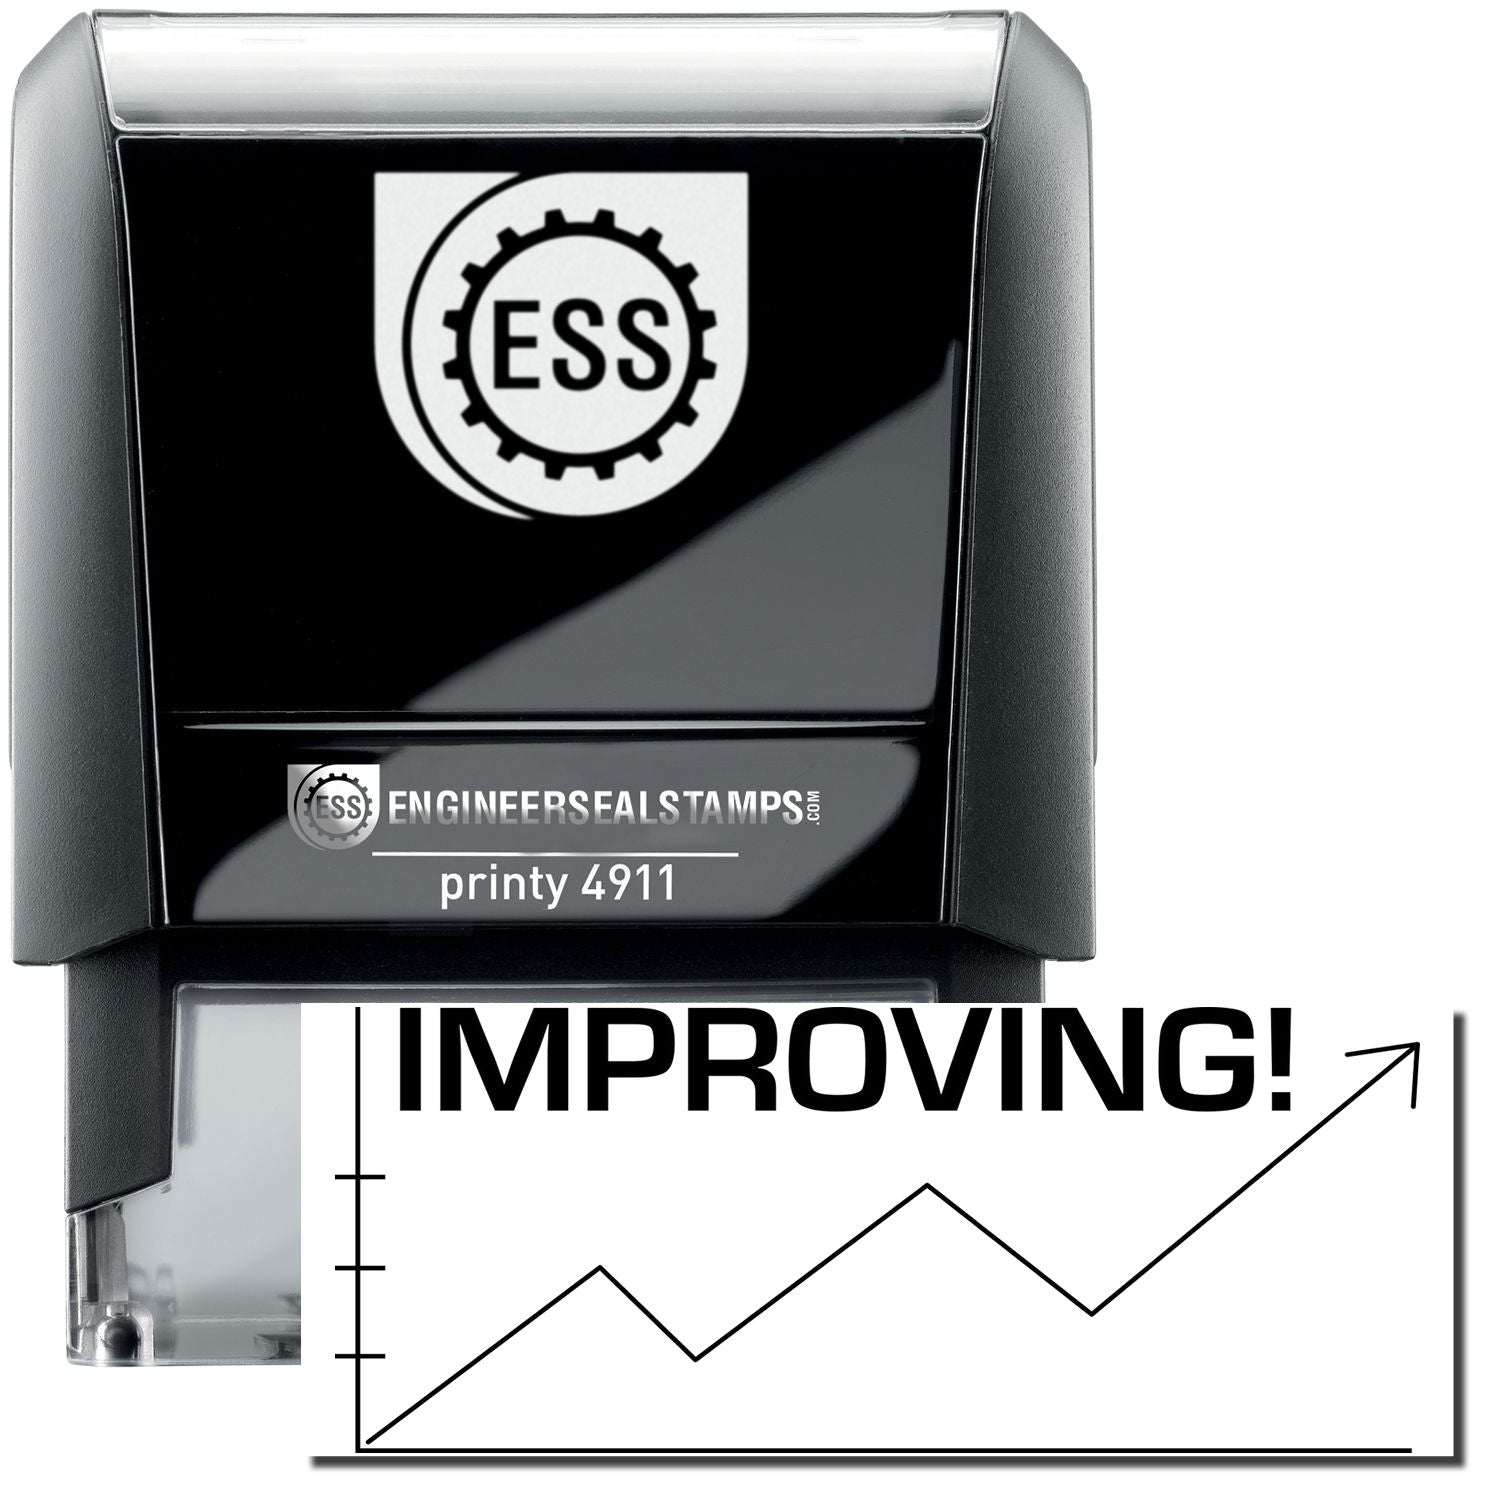 A self-inking stamp with a stamped image showing how the text "IMPROVING" (with an image of a chart below that shows an arrow moving up, down, and back up again) is displayed after stamping.